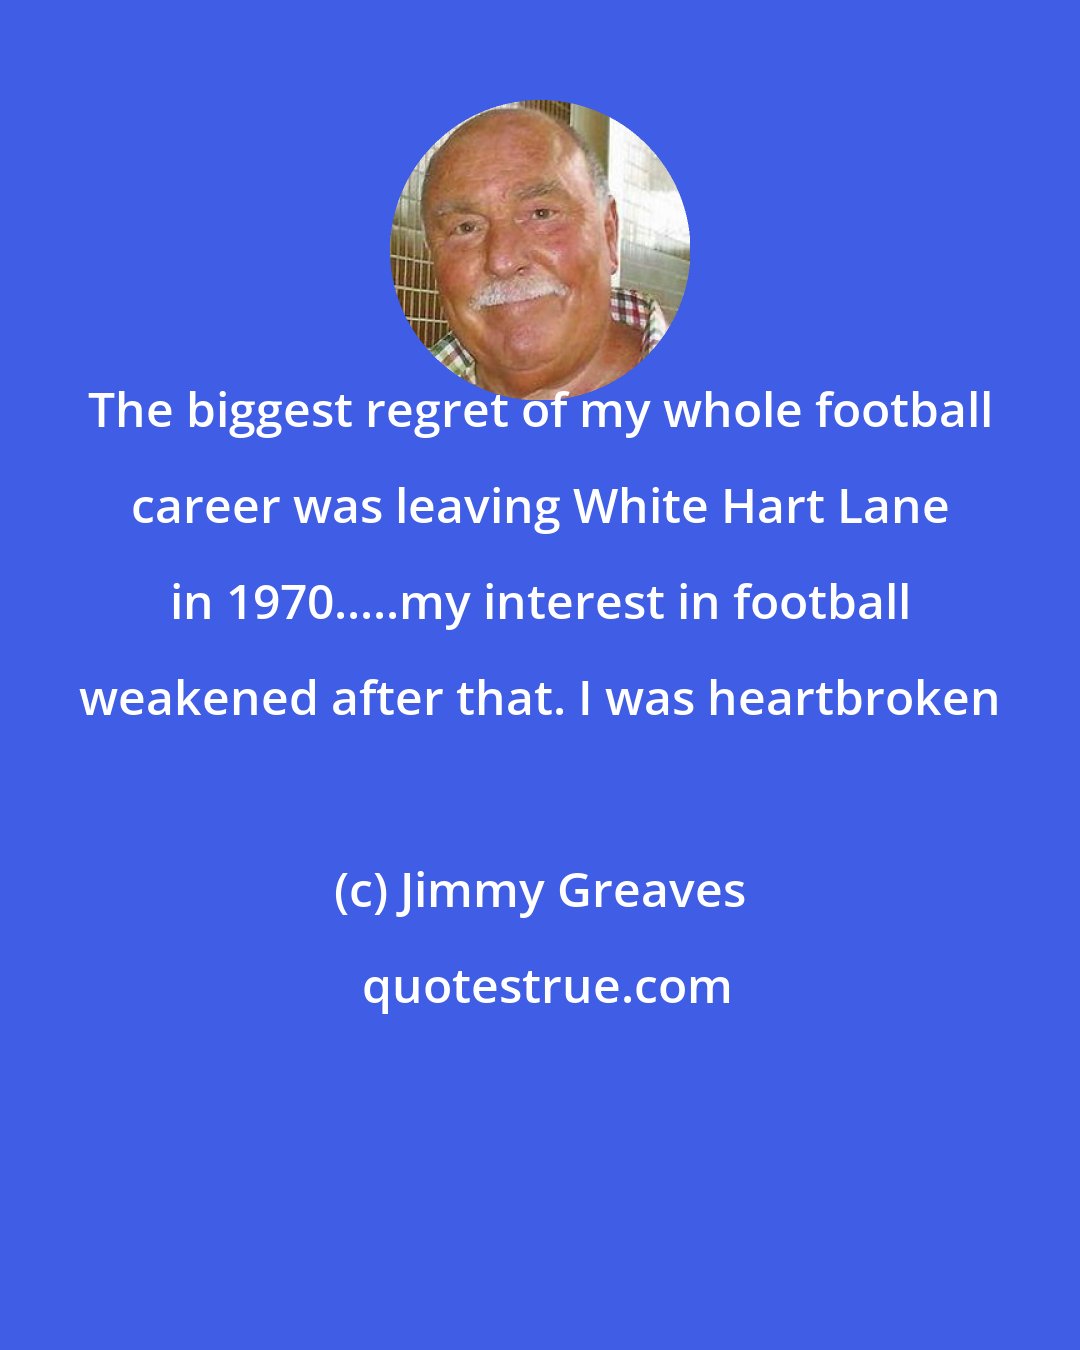 Jimmy Greaves: The biggest regret of my whole football career was leaving White Hart Lane in 1970.....my interest in football weakened after that. I was heartbroken